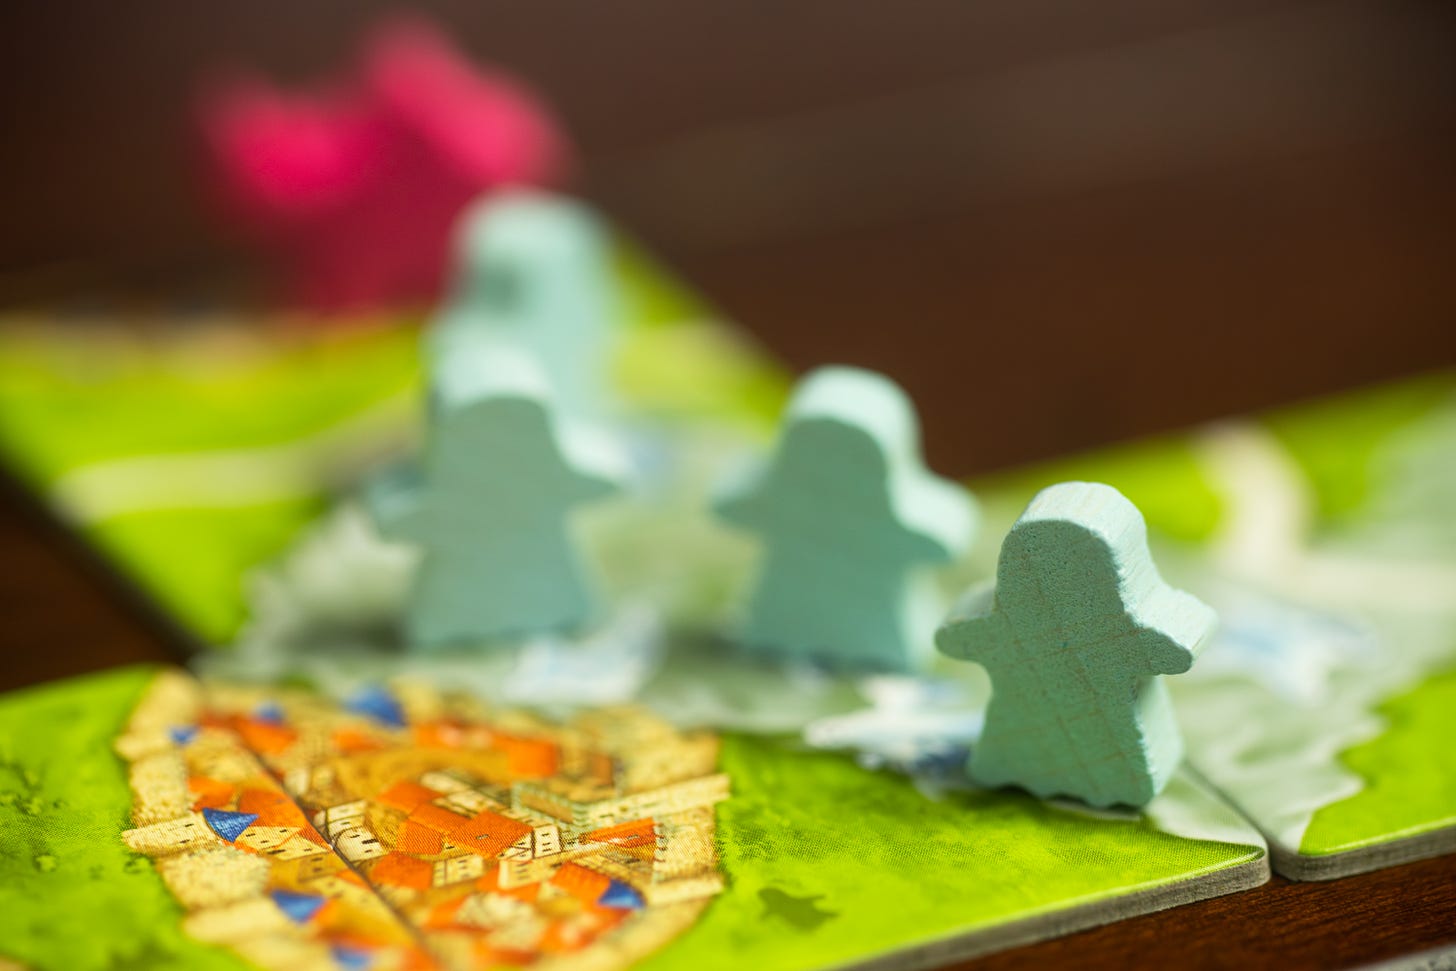 Ghost meeples from Mists over Carcassonne standing on a tile.